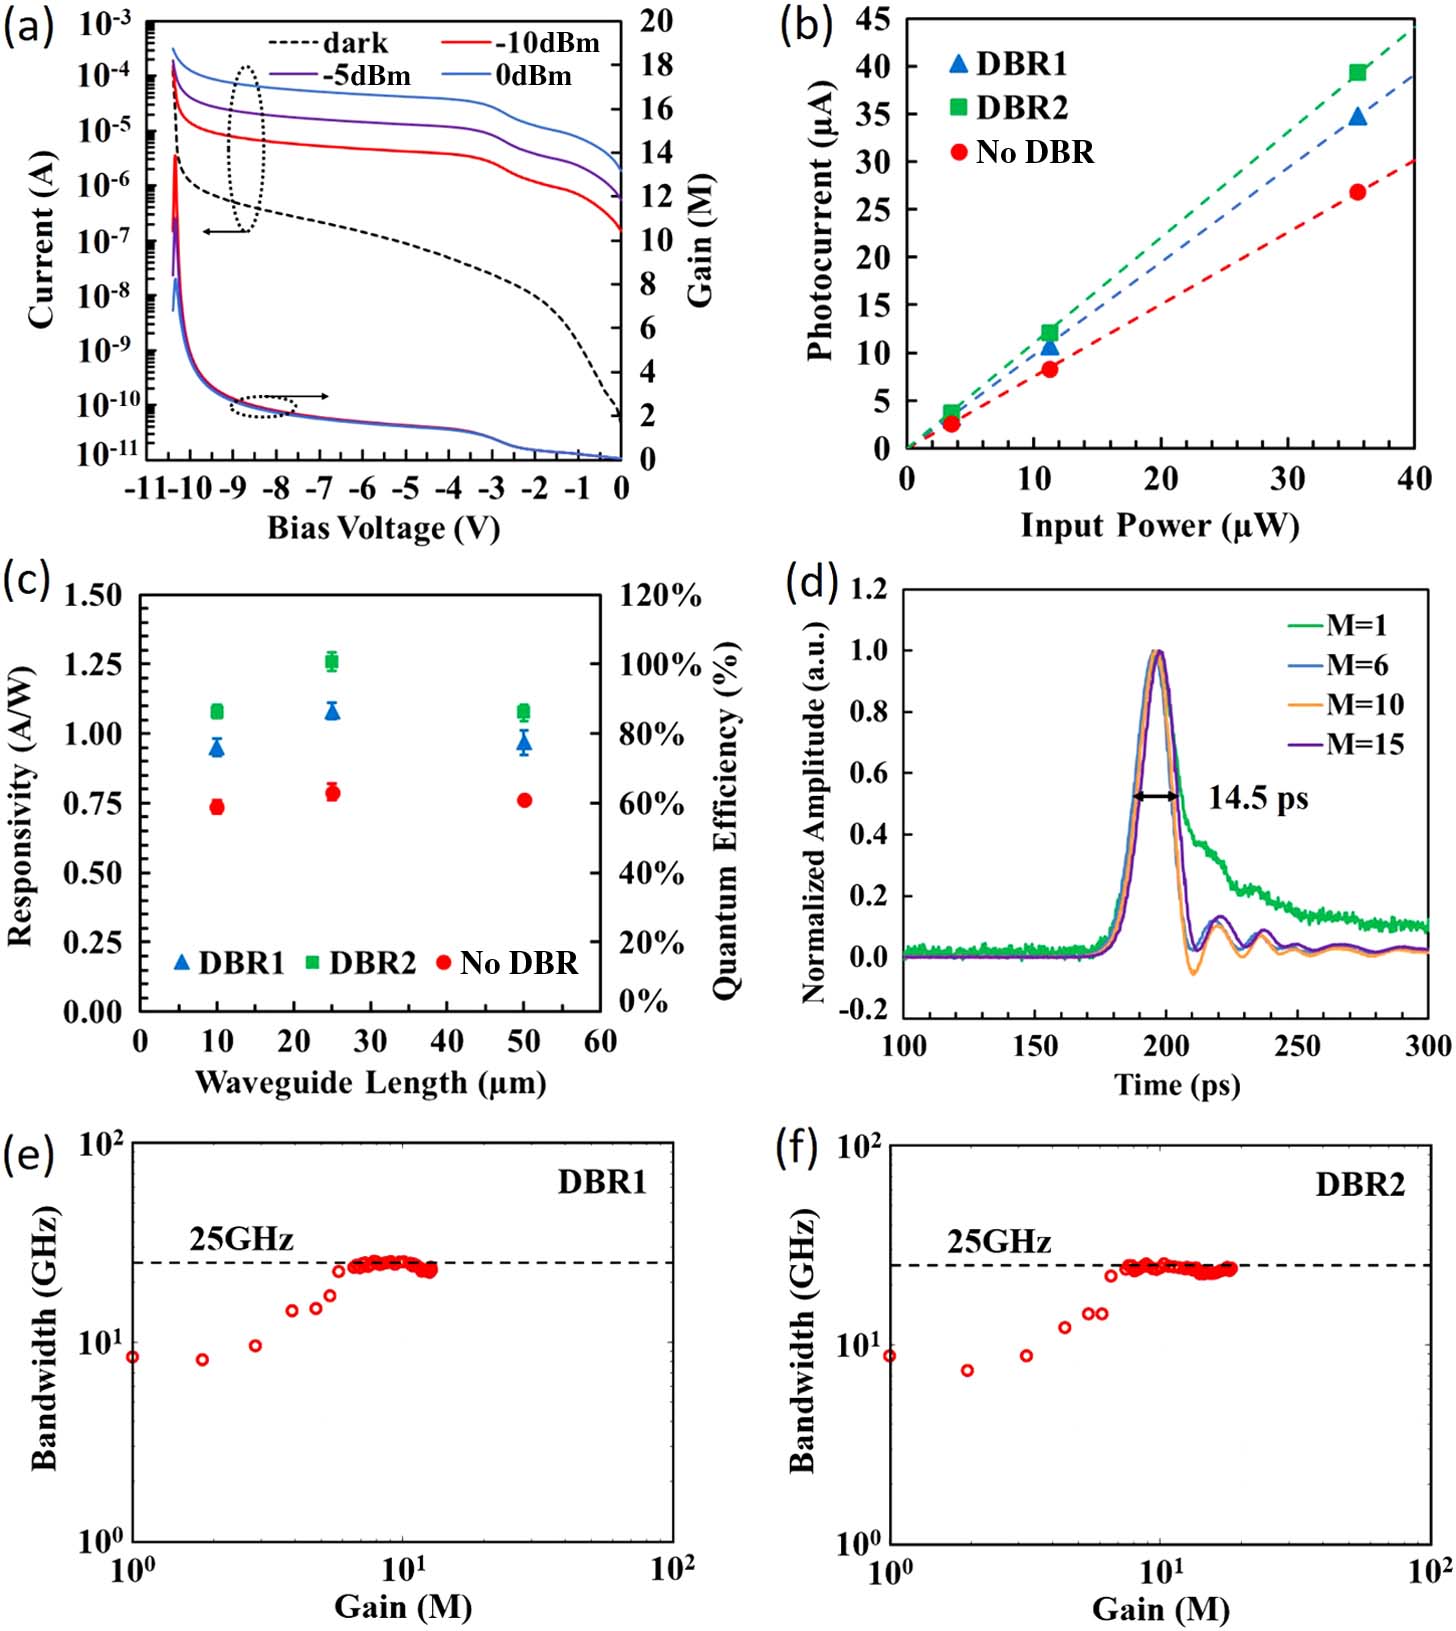 (a) Dark and photo current versus bias voltage with input optical power of −10, −5, and 0 dBm for a 4 μm×10 μm APD with a 6-period DBR2. (b) Photocurrent versus input optical power for 4 μm×10 μm APDs with no DBR, DBR1, and DBR2, respectively. (c) Responsivity at unity gain and quantum efficiency for three types of APDs, each with the same waveguide width of 4 μm but various waveguide lengths of 10 μm, 25 μm, and 50 μm. (d) Measured impulse responses of a 4 μm×10 μm APD with DBR2 at various multiplication gains. The shortest pulse has an FWHM of 14.5 ps. (e) and (f) Device bandwidth versus multiplication gain for APDs with DBR1 and DBR2, respectively. A 25 GHz bandwidth was achieved for both designs.